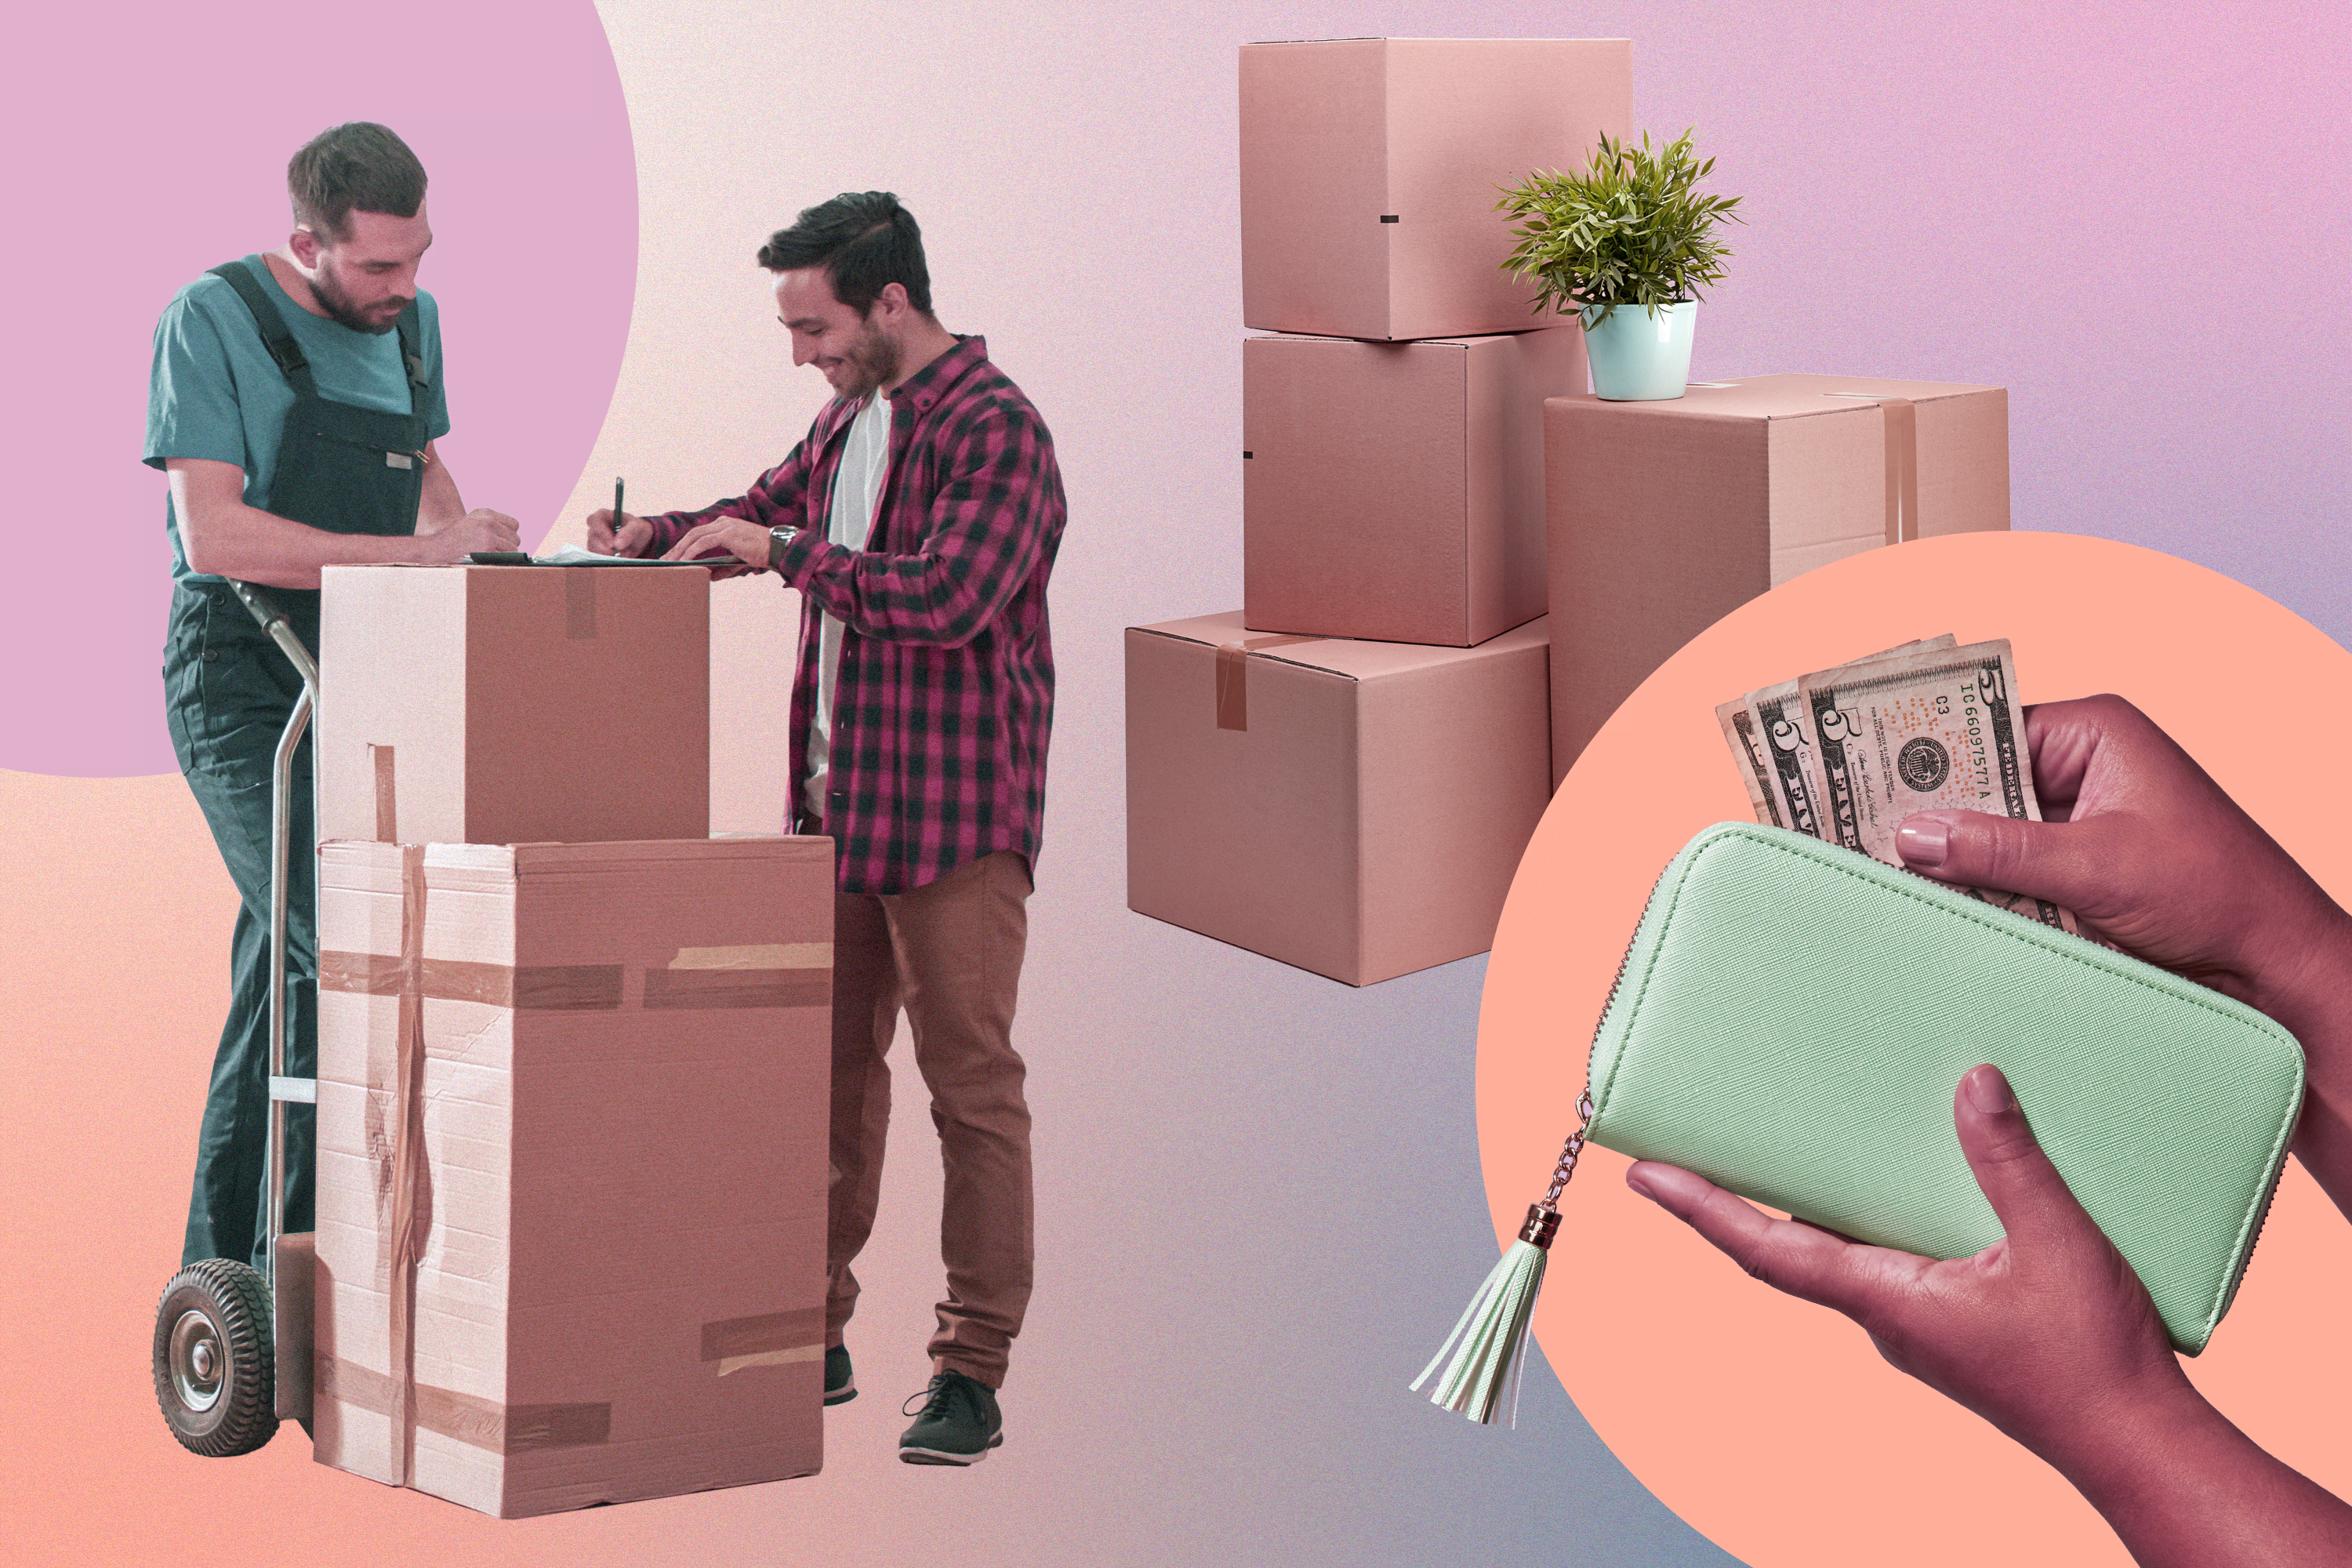 How To Save Money On Moving Costs